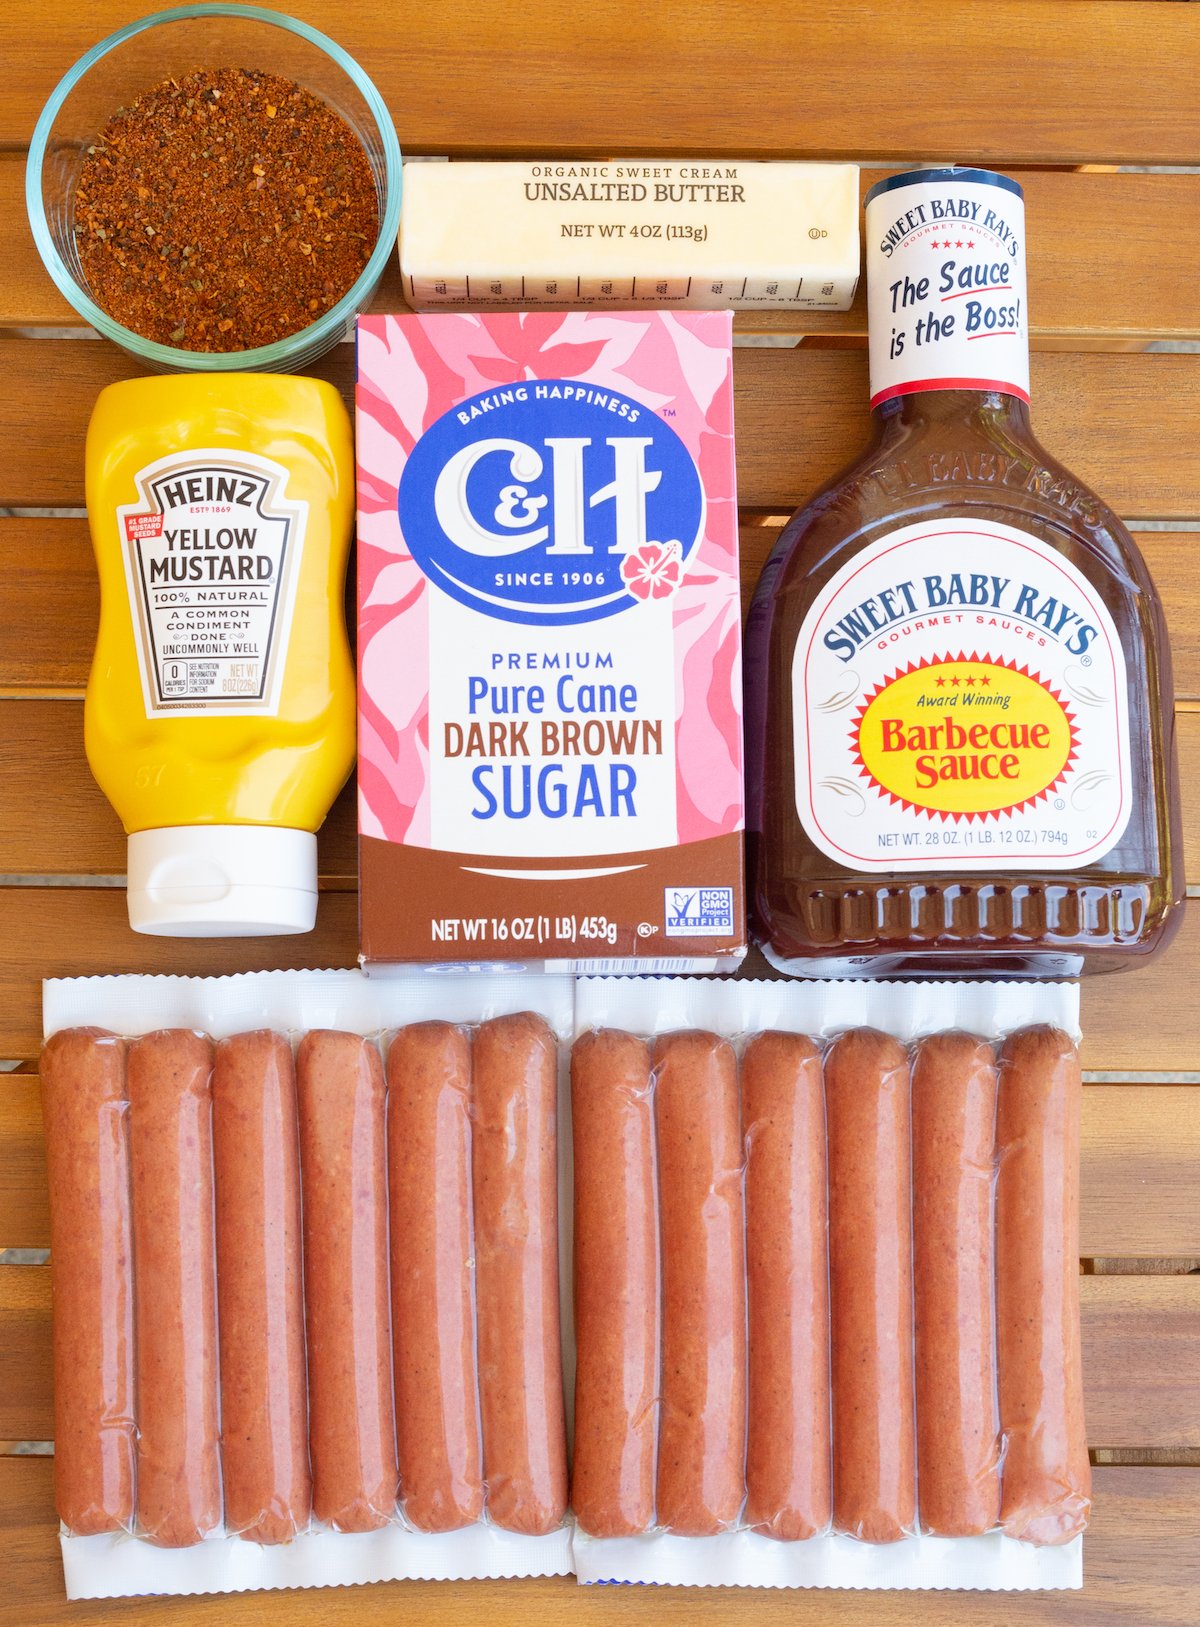 All the ingredients to make hot dog burnt ends laid out on a wooden outdoor table.